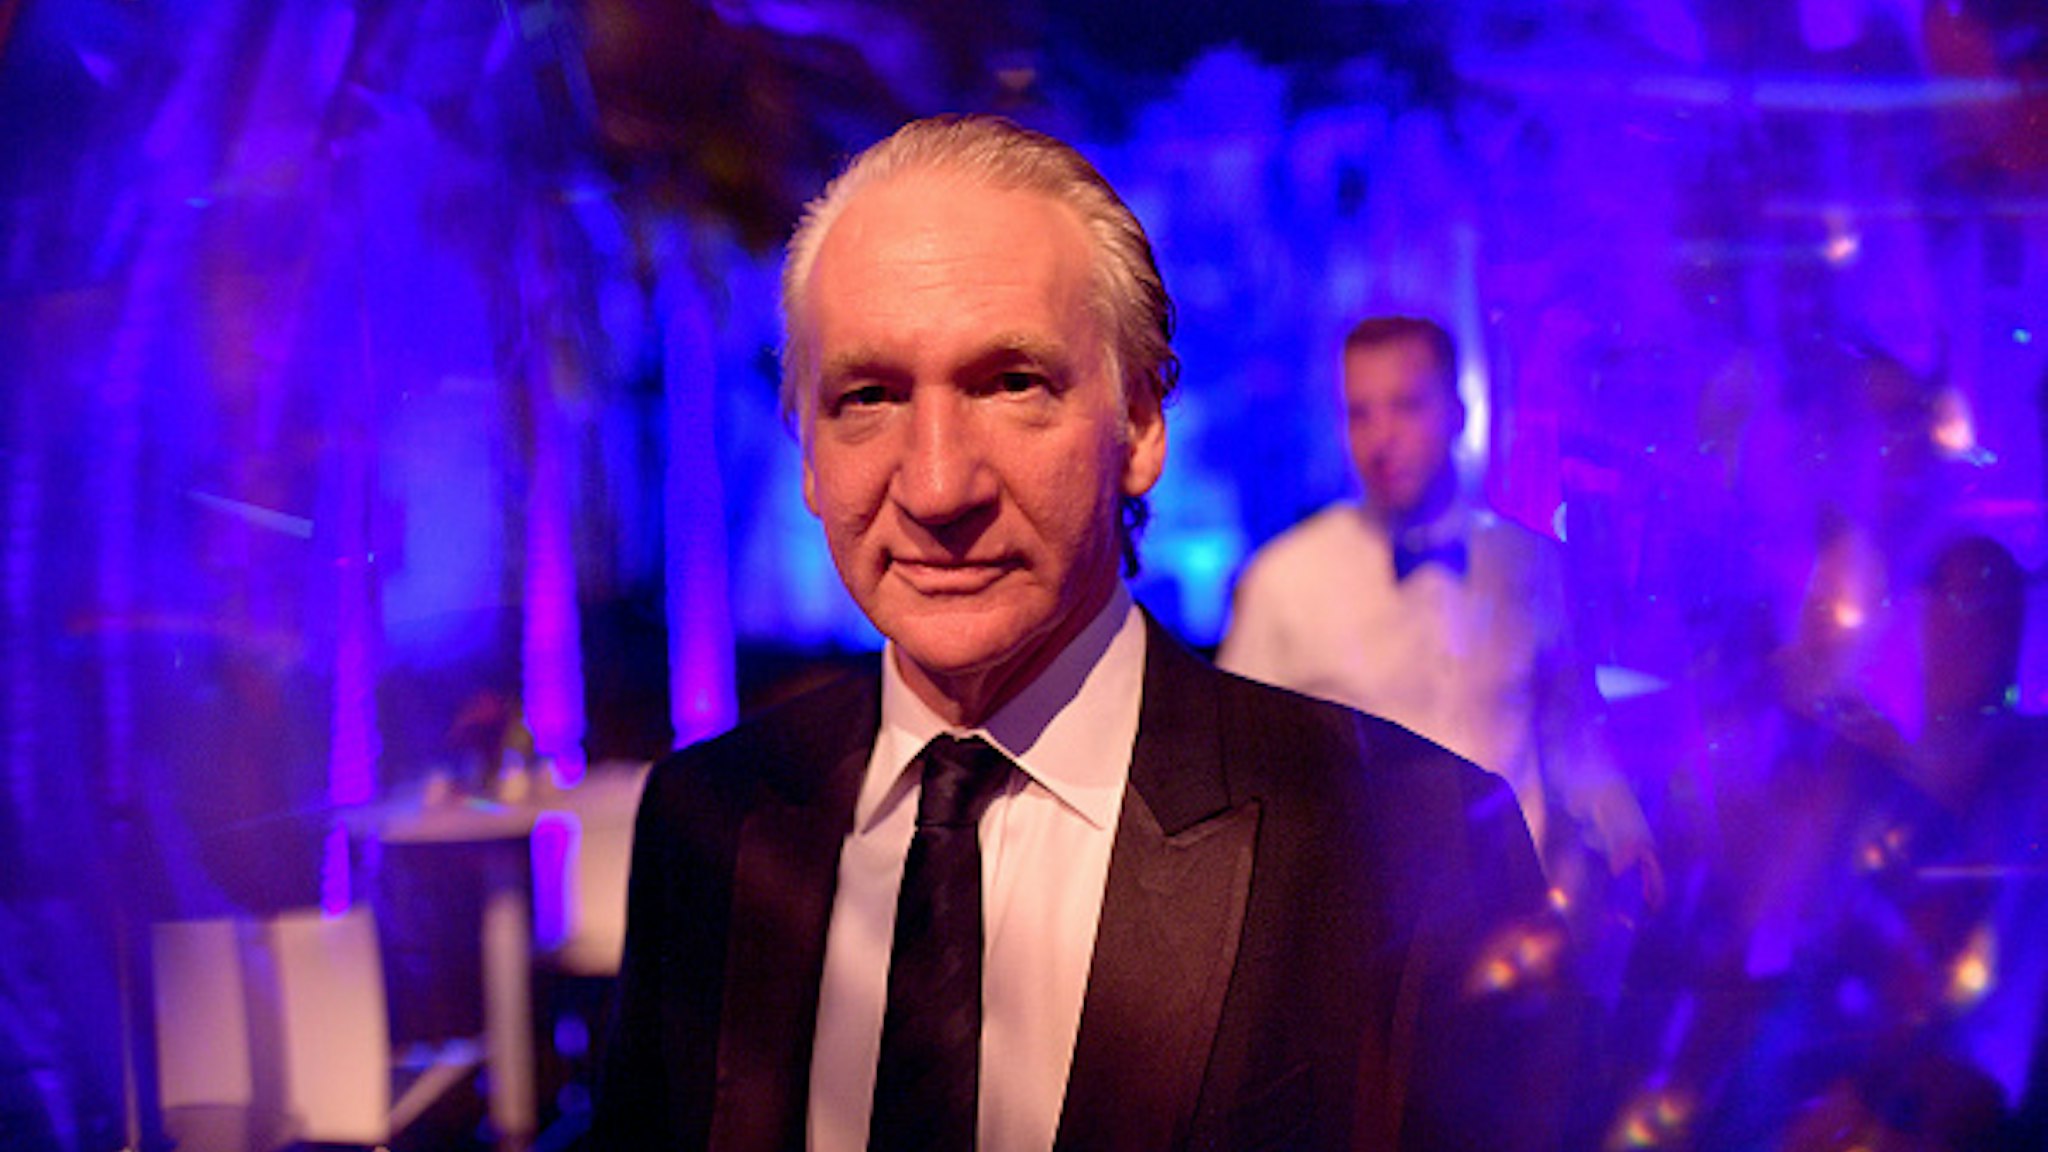 BEVERLY HILLS, CALIFORNIA - FEBRUARY 09: (EDITORS NOTE: Image was created in camera using a reflective surface.) Bill Maher attends the 2020 Vanity Fair Oscar Party hosted by Radhika Jones at Wallis Annenberg Center for the Performing Arts on February 09, 2020 in Beverly Hills, California.